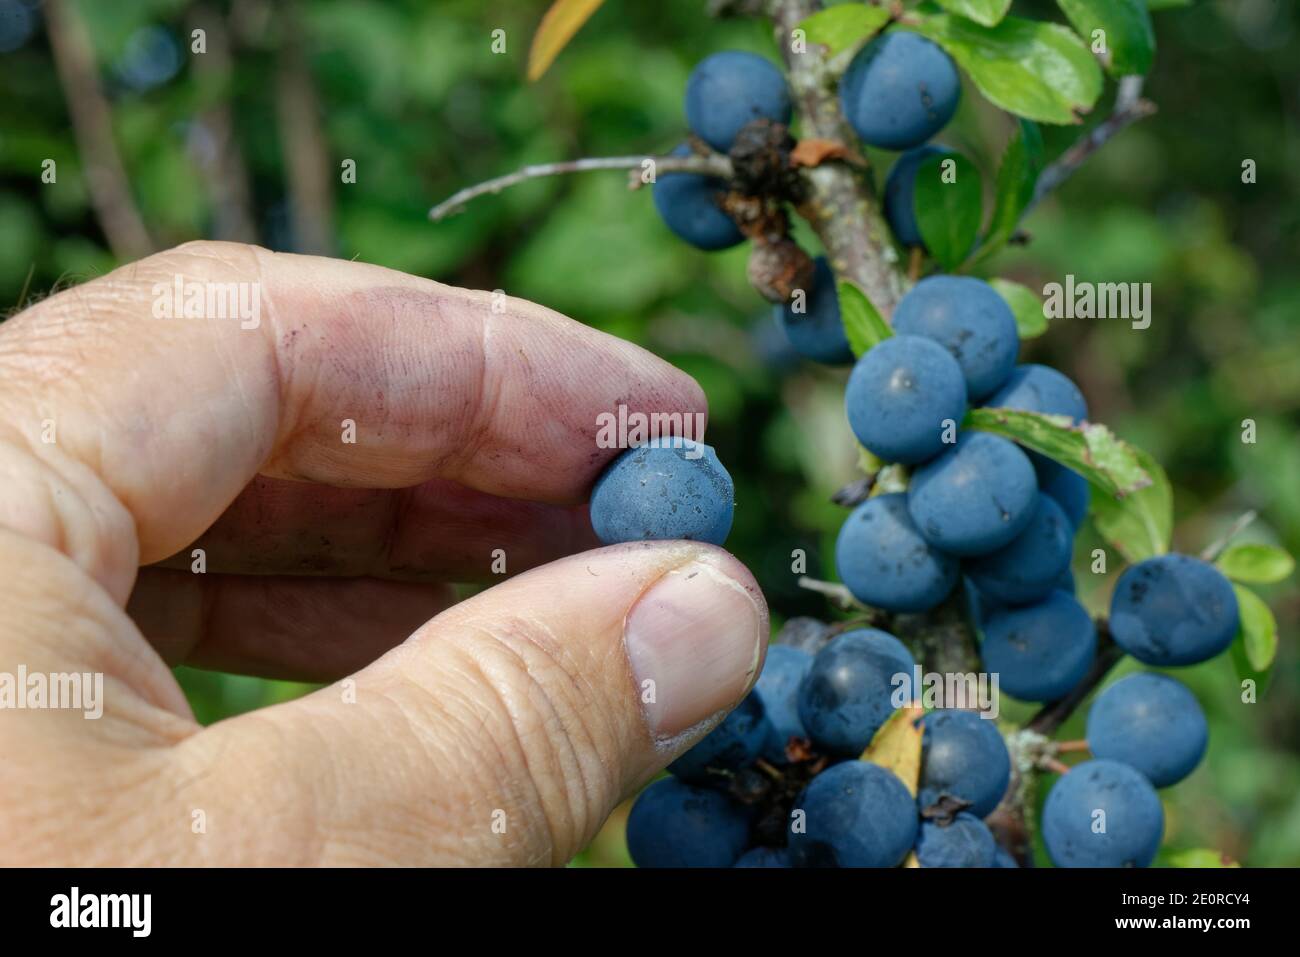 Blackthorn (Prunus spinosa) sloes being picked from a hedgerow bush, Wiltshire, UK, September. Model released. Stock Photo